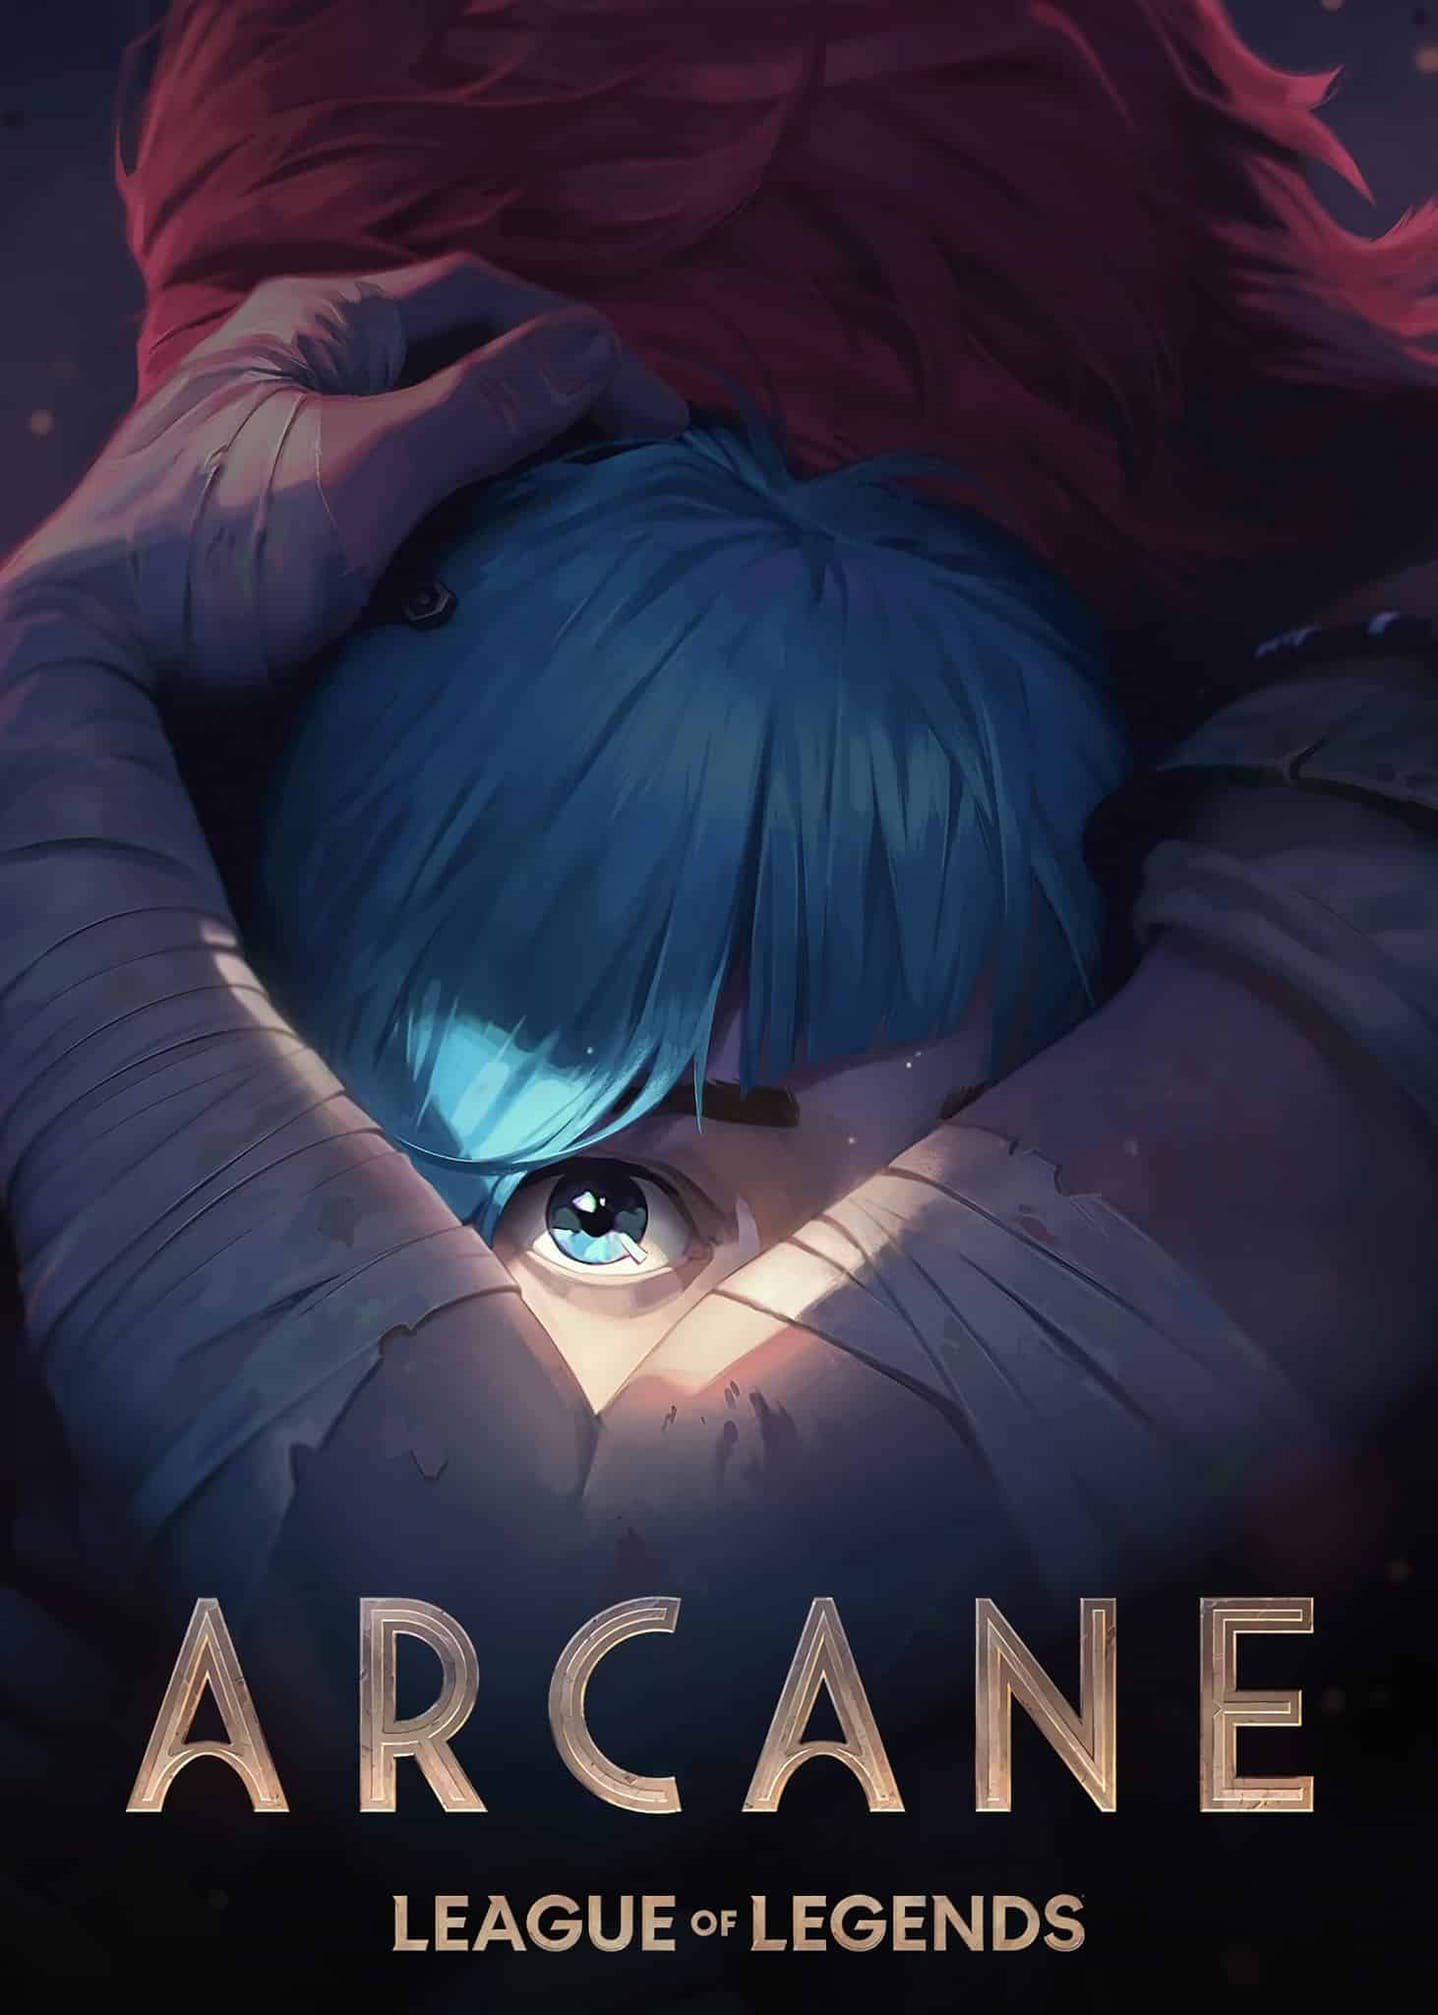 League of Legends Arcane Riots new animated show coming to Netflix   Polygon